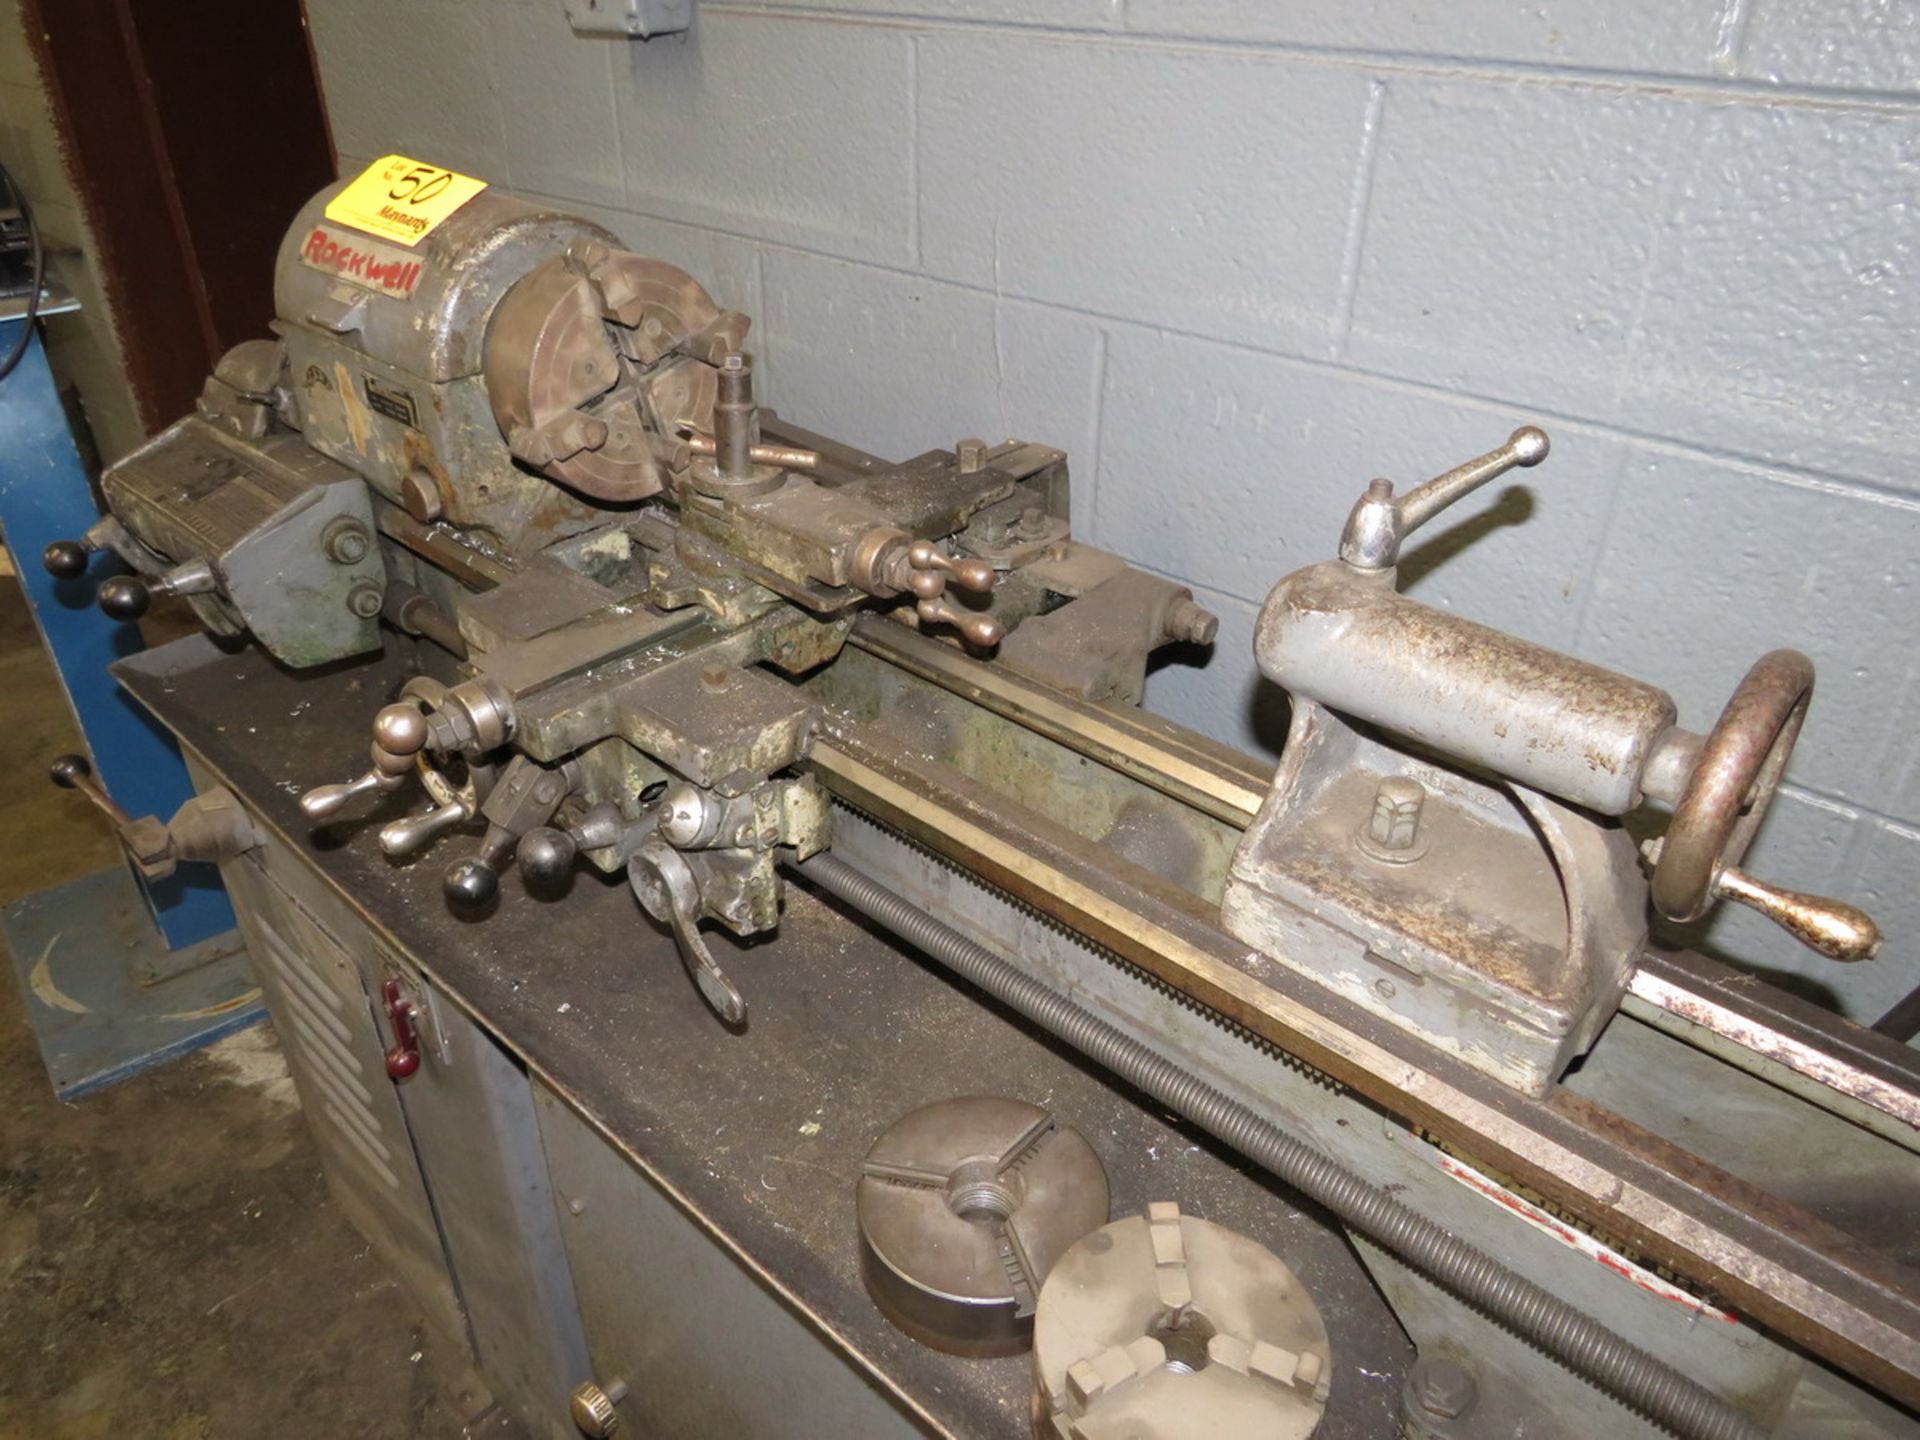 Rockwell Lathe 36" Bed, 1" Through Hole, to Include: Steady Rest, (1) 6" 4-Jaw Chuck, (2) 5" 3-Jaw - Image 2 of 4